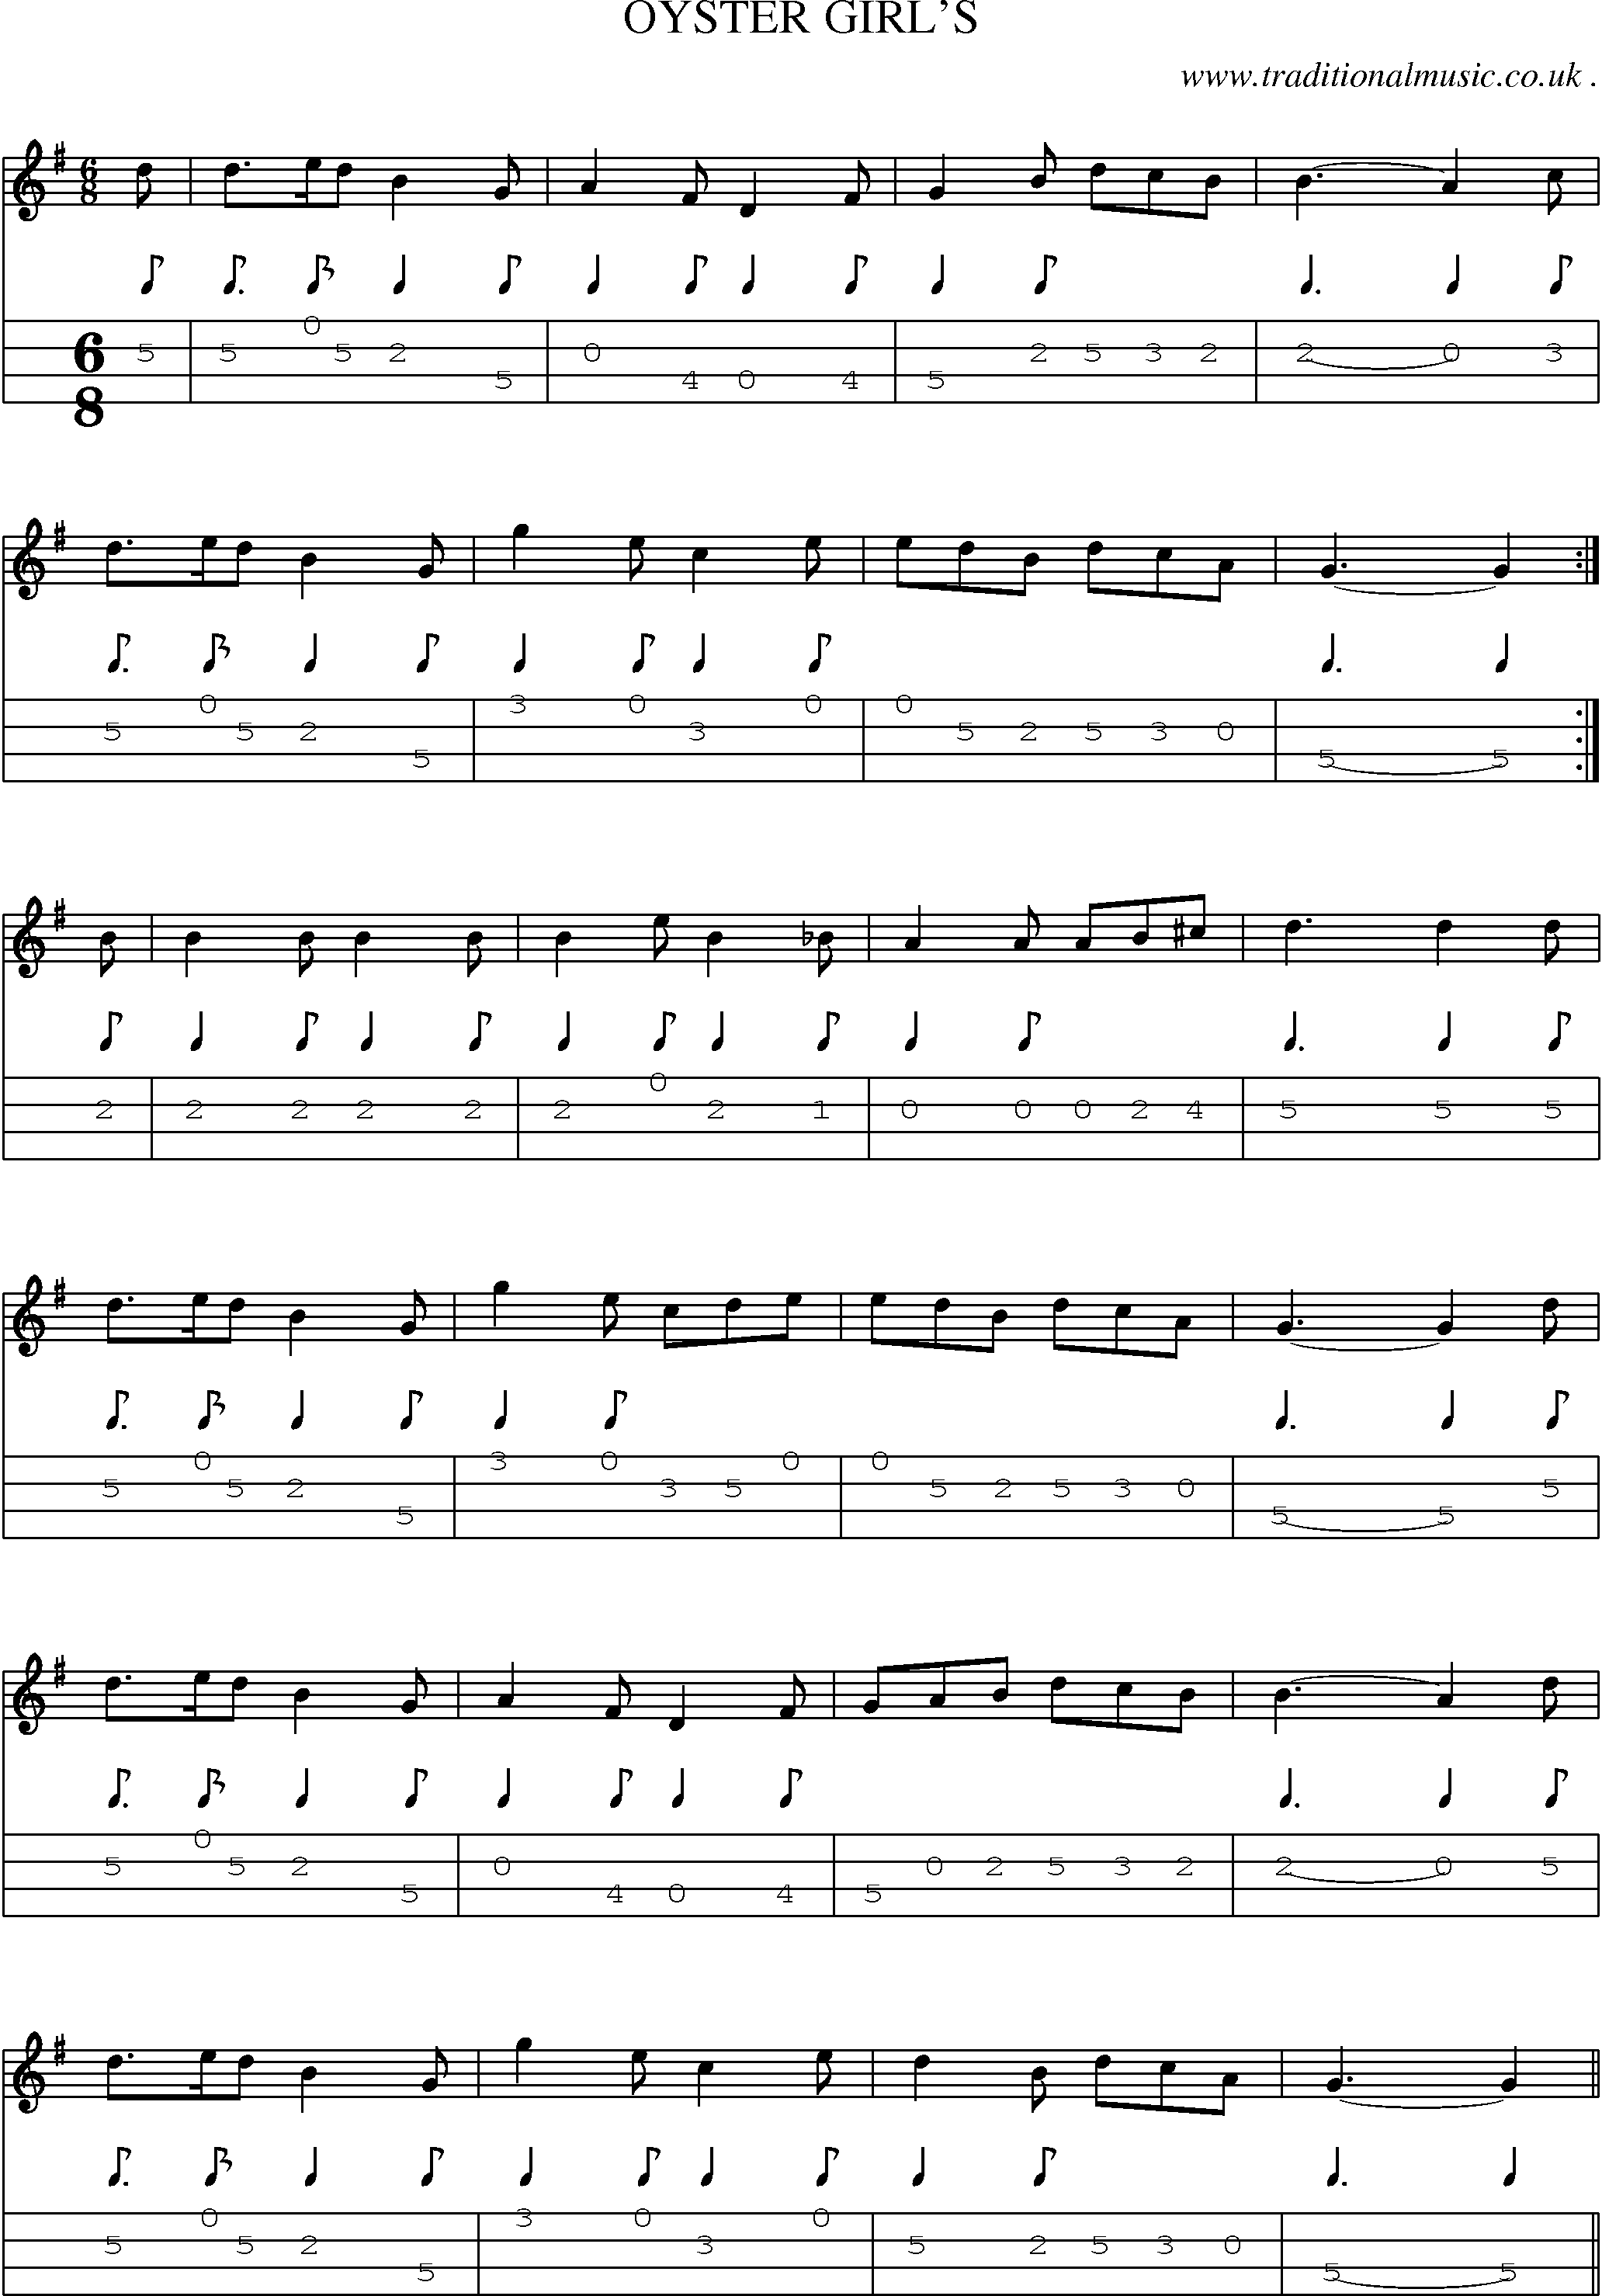 Sheet-Music and Mandolin Tabs for Oyster Girls